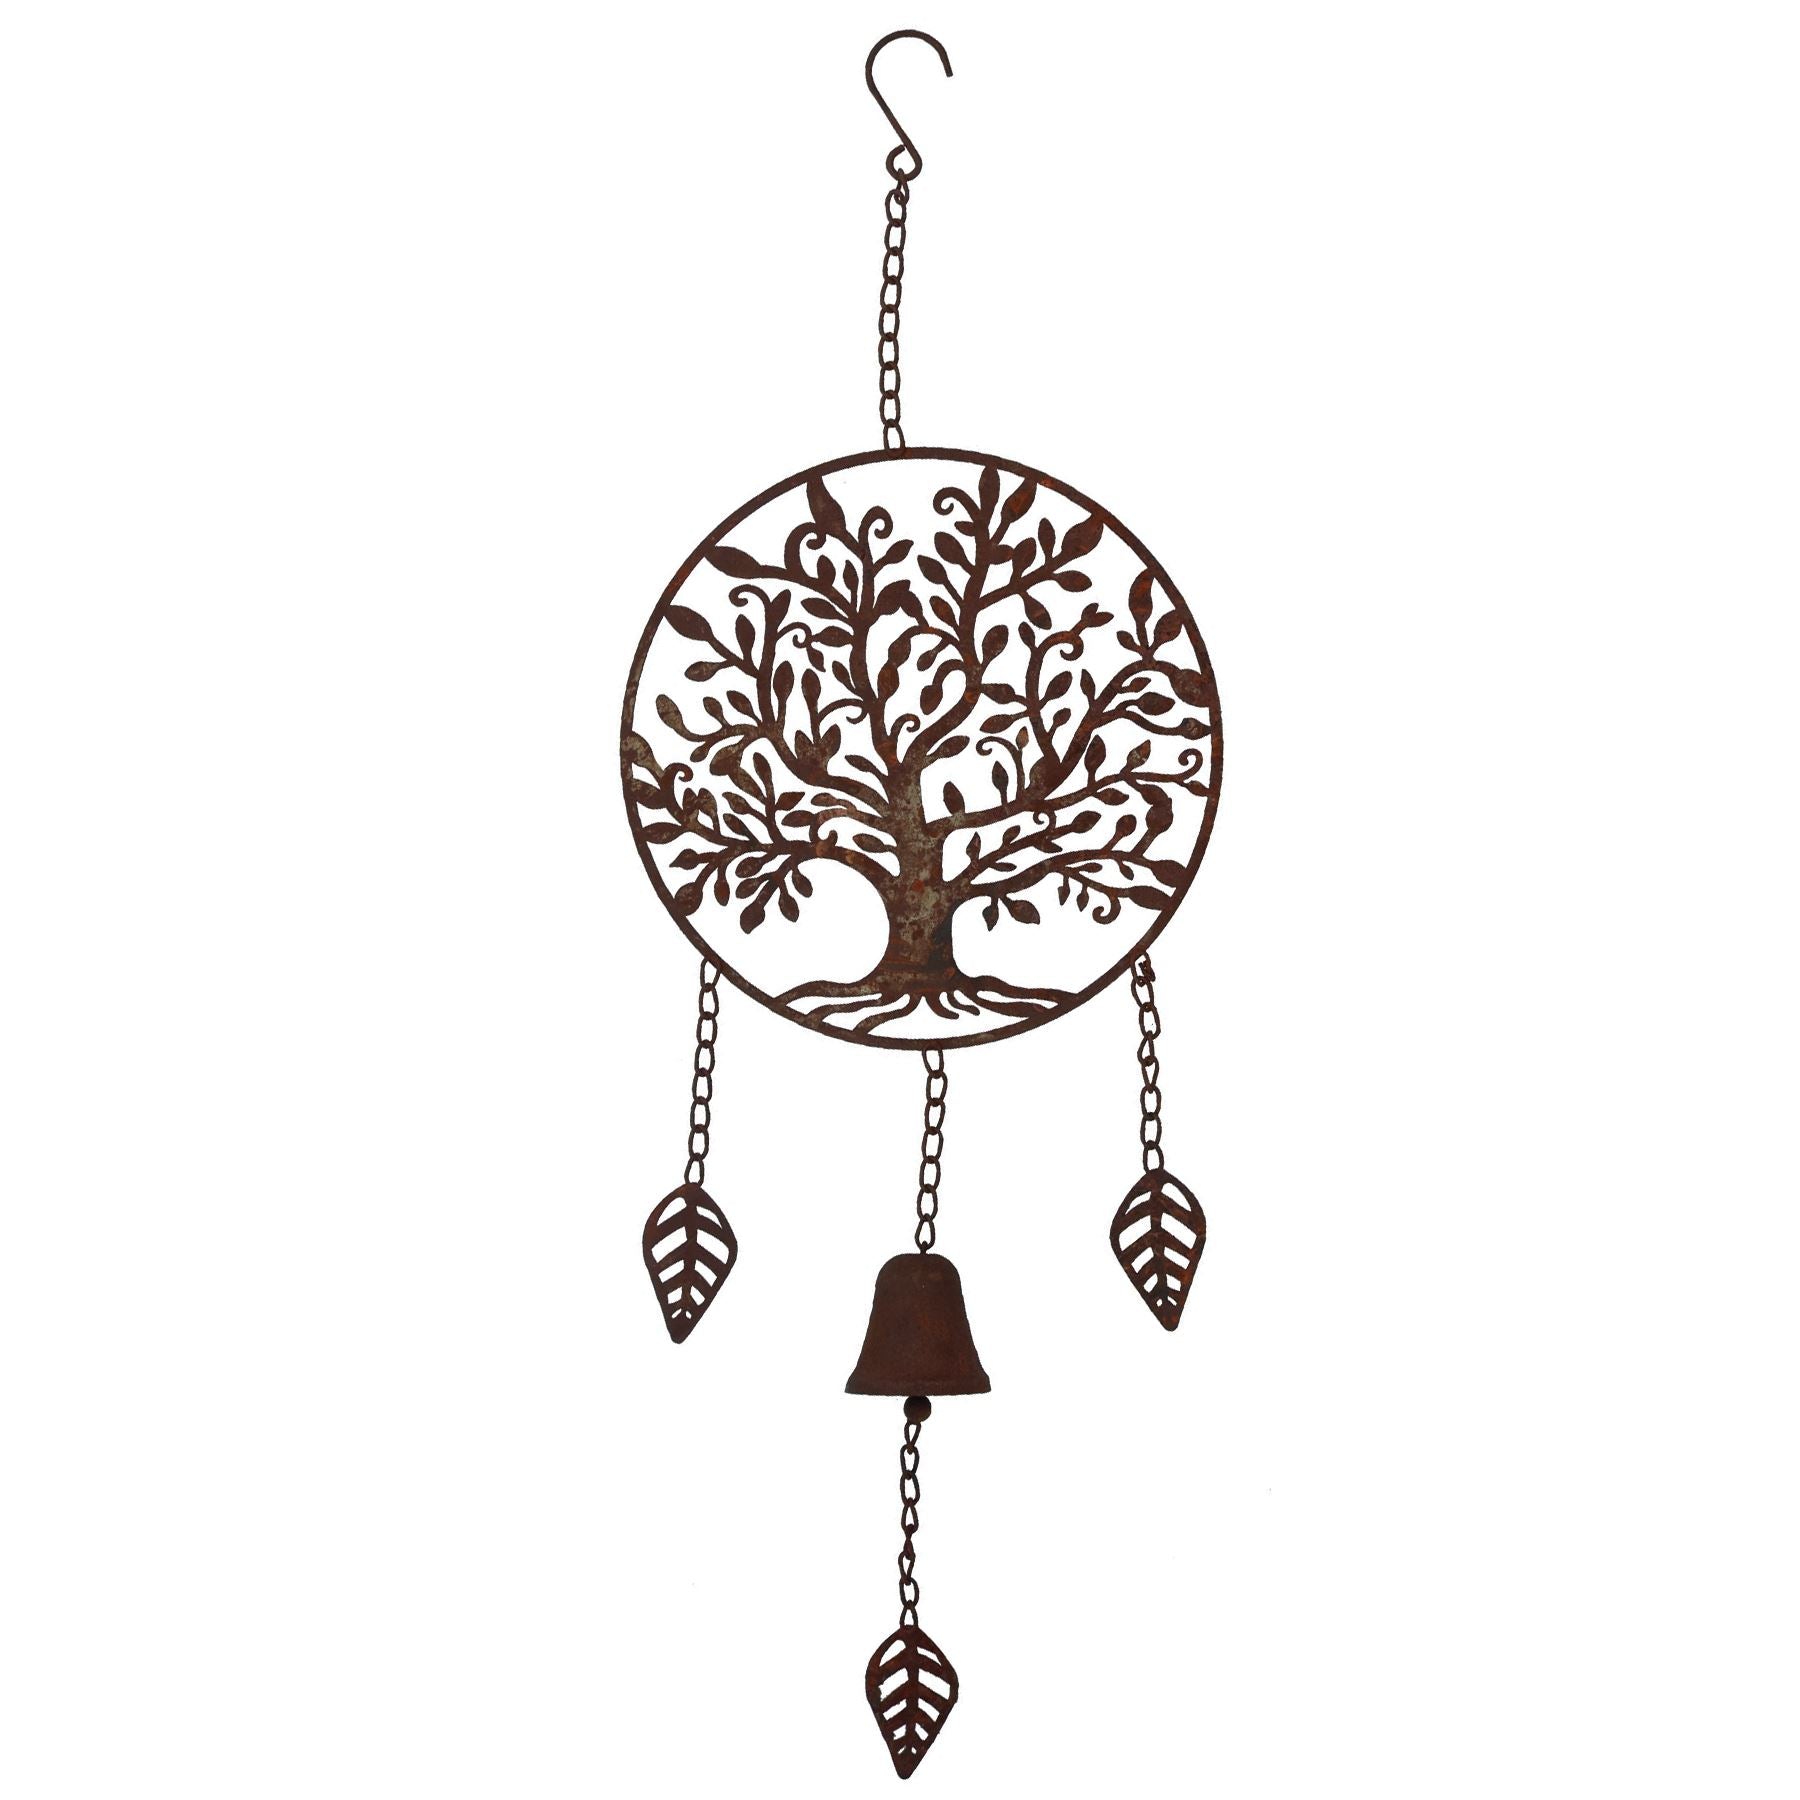 Tree of Life Wind Chime Bell Hanging Garden Yard Decor Metal Ornament House